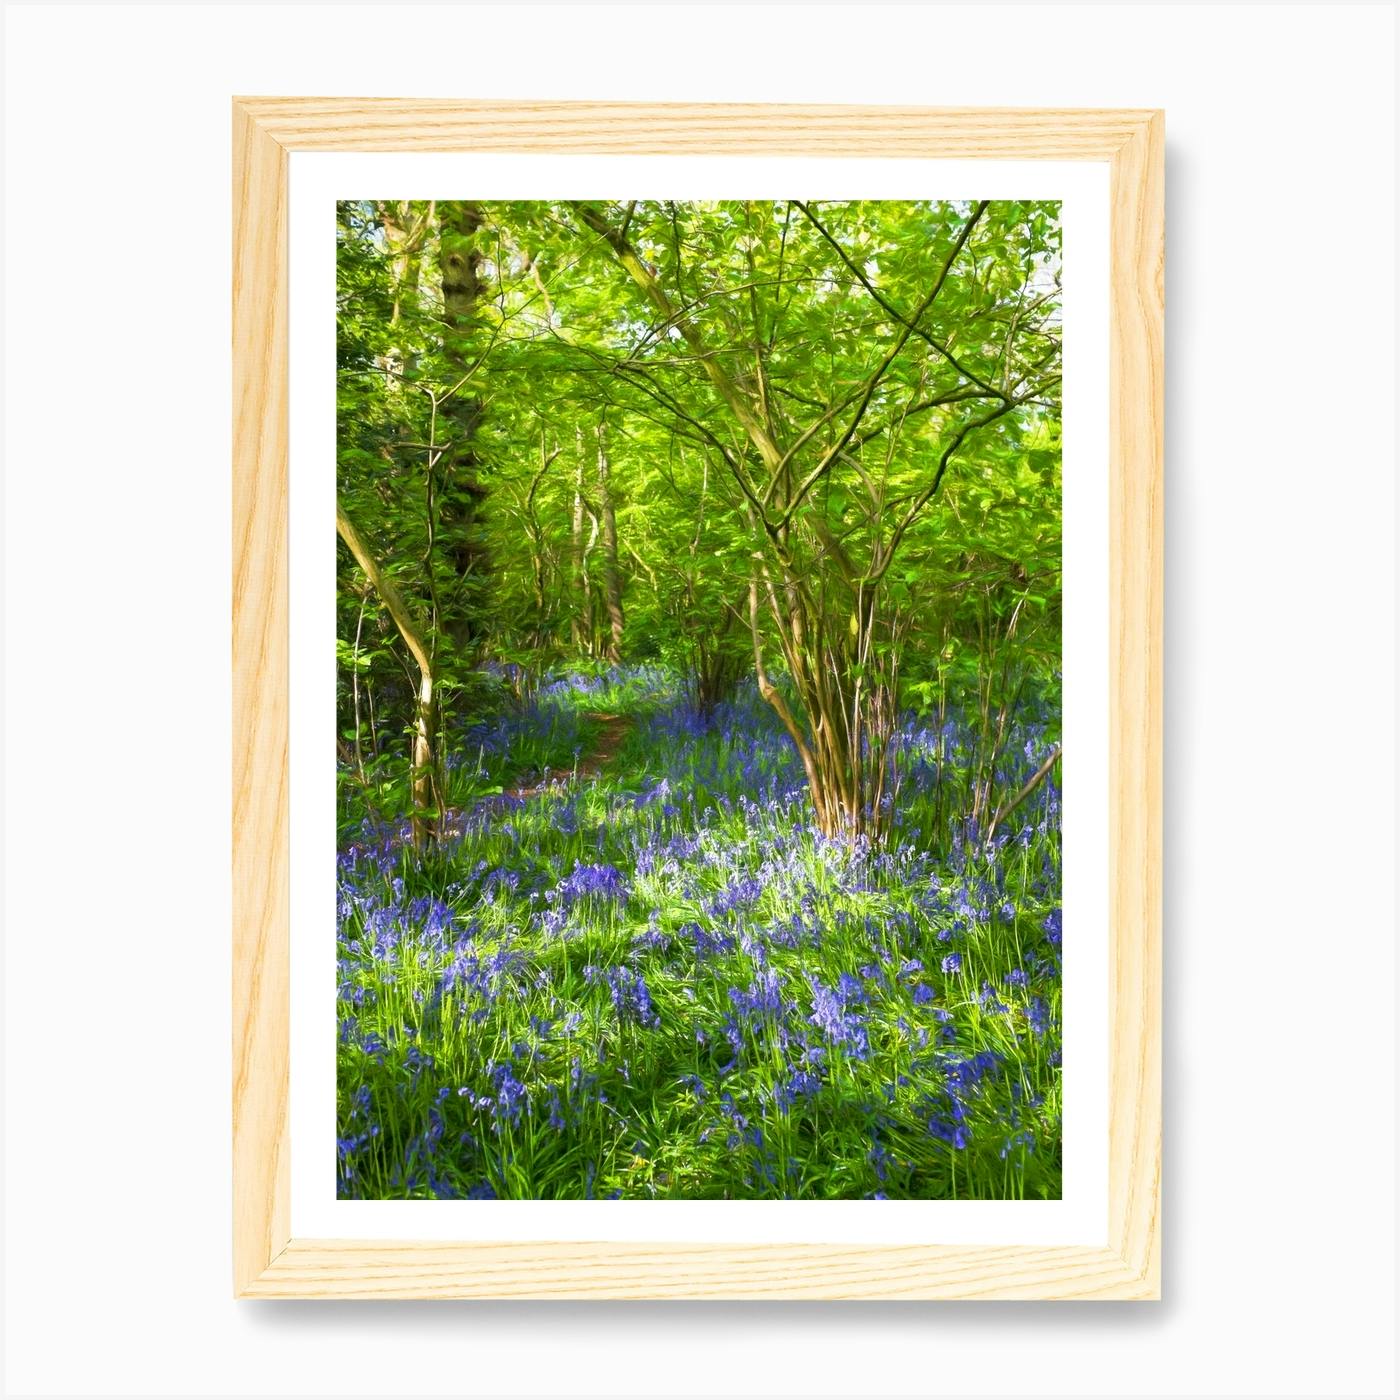 Bluebell Woods Country Landscape Canvas Pictures Wall Artwork Prints All Sizes 